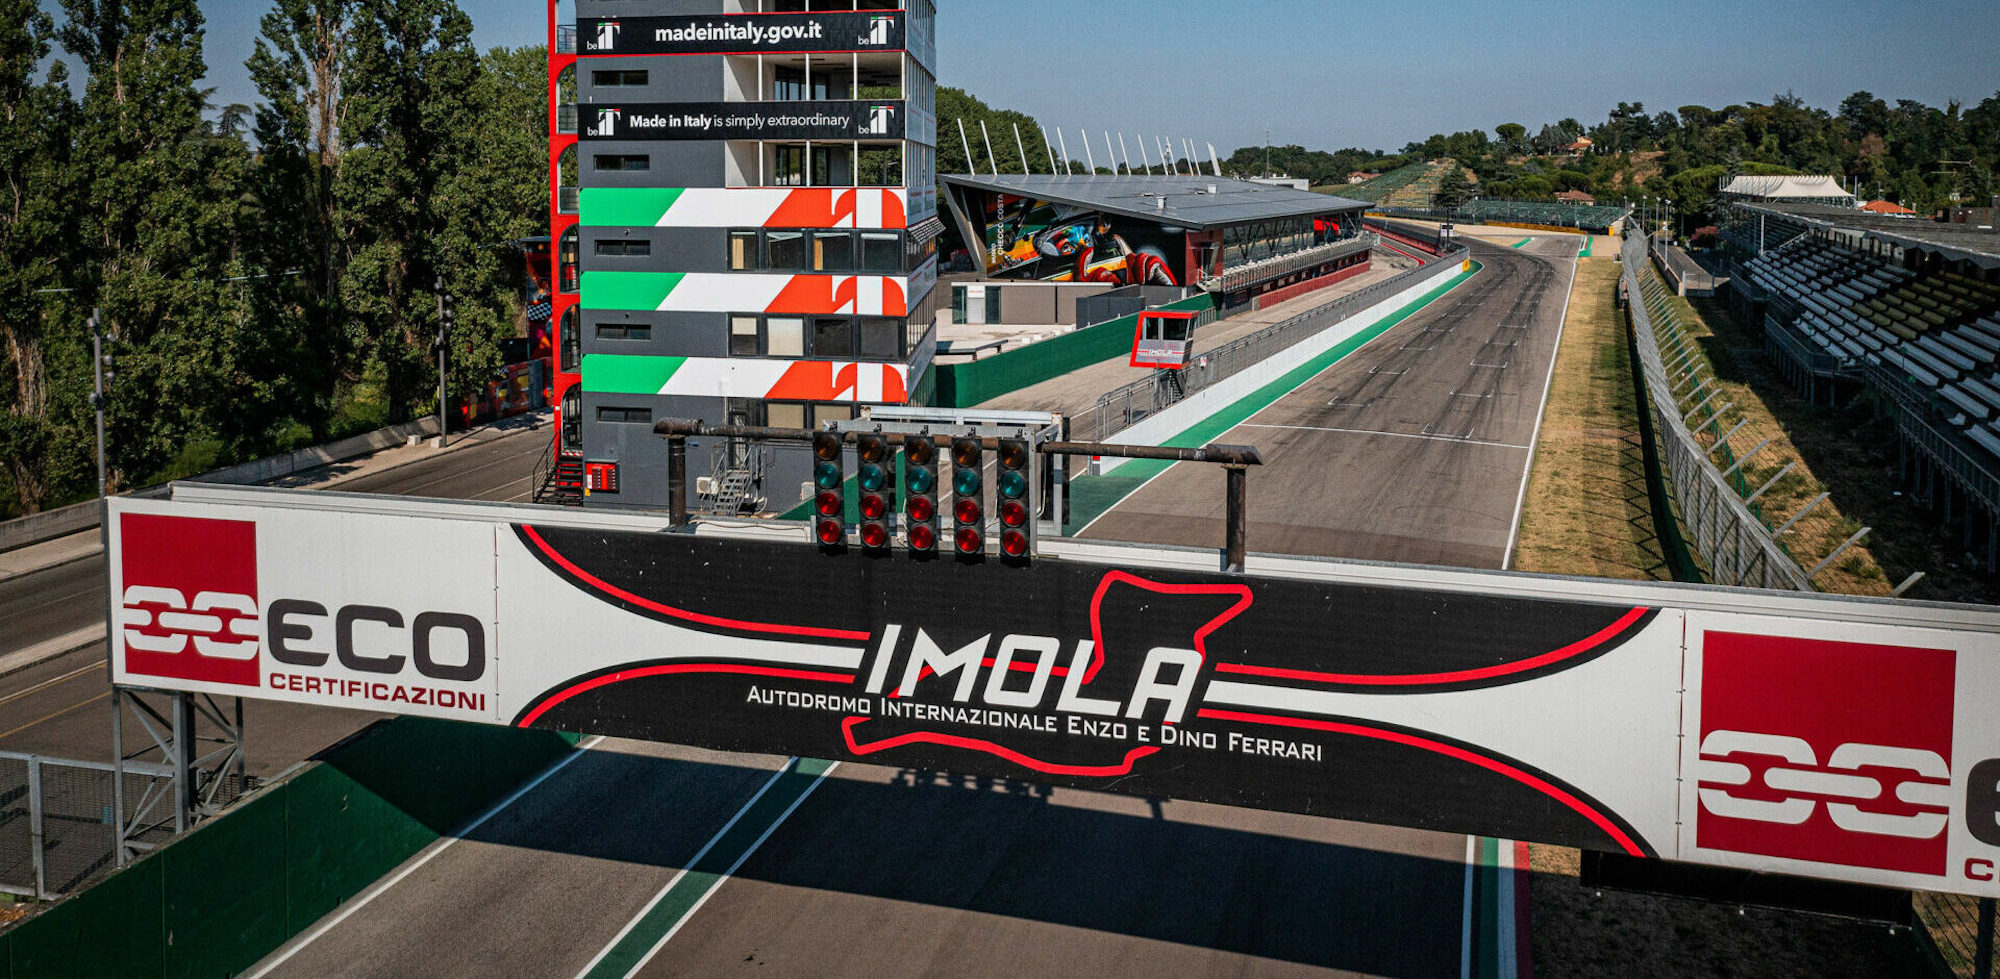 Italy's Imola Circuit. Media sourced from Roadracing World.